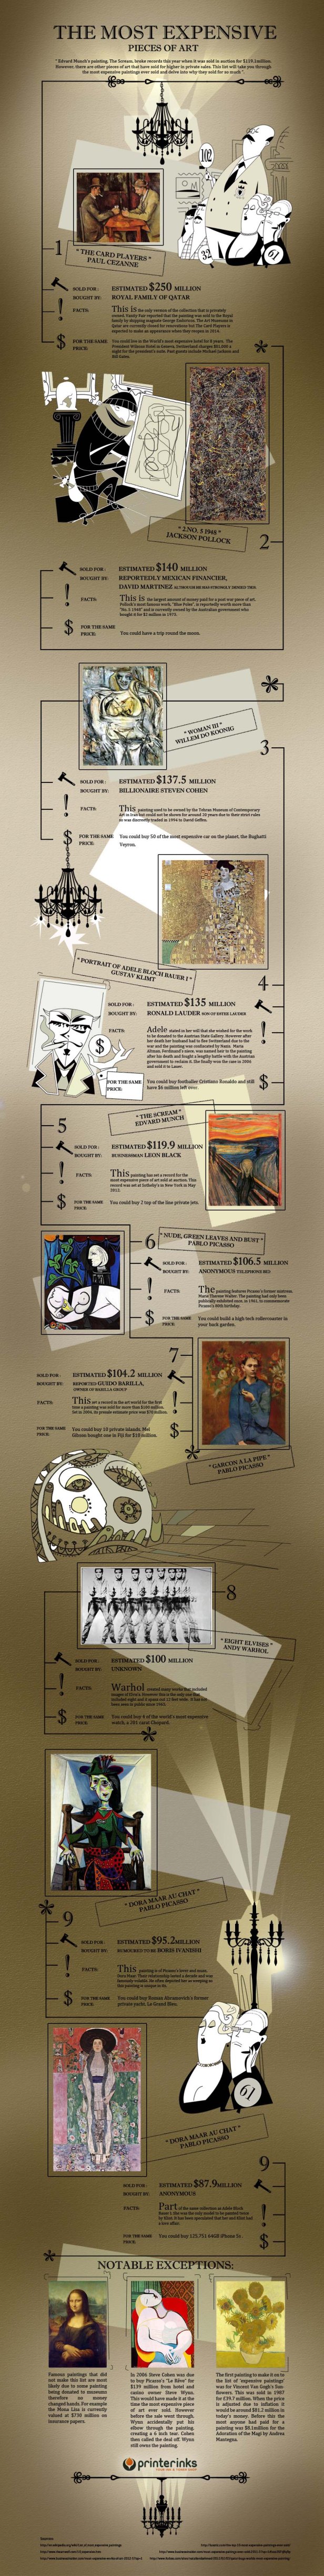 The Most Expensive Pieces of Art